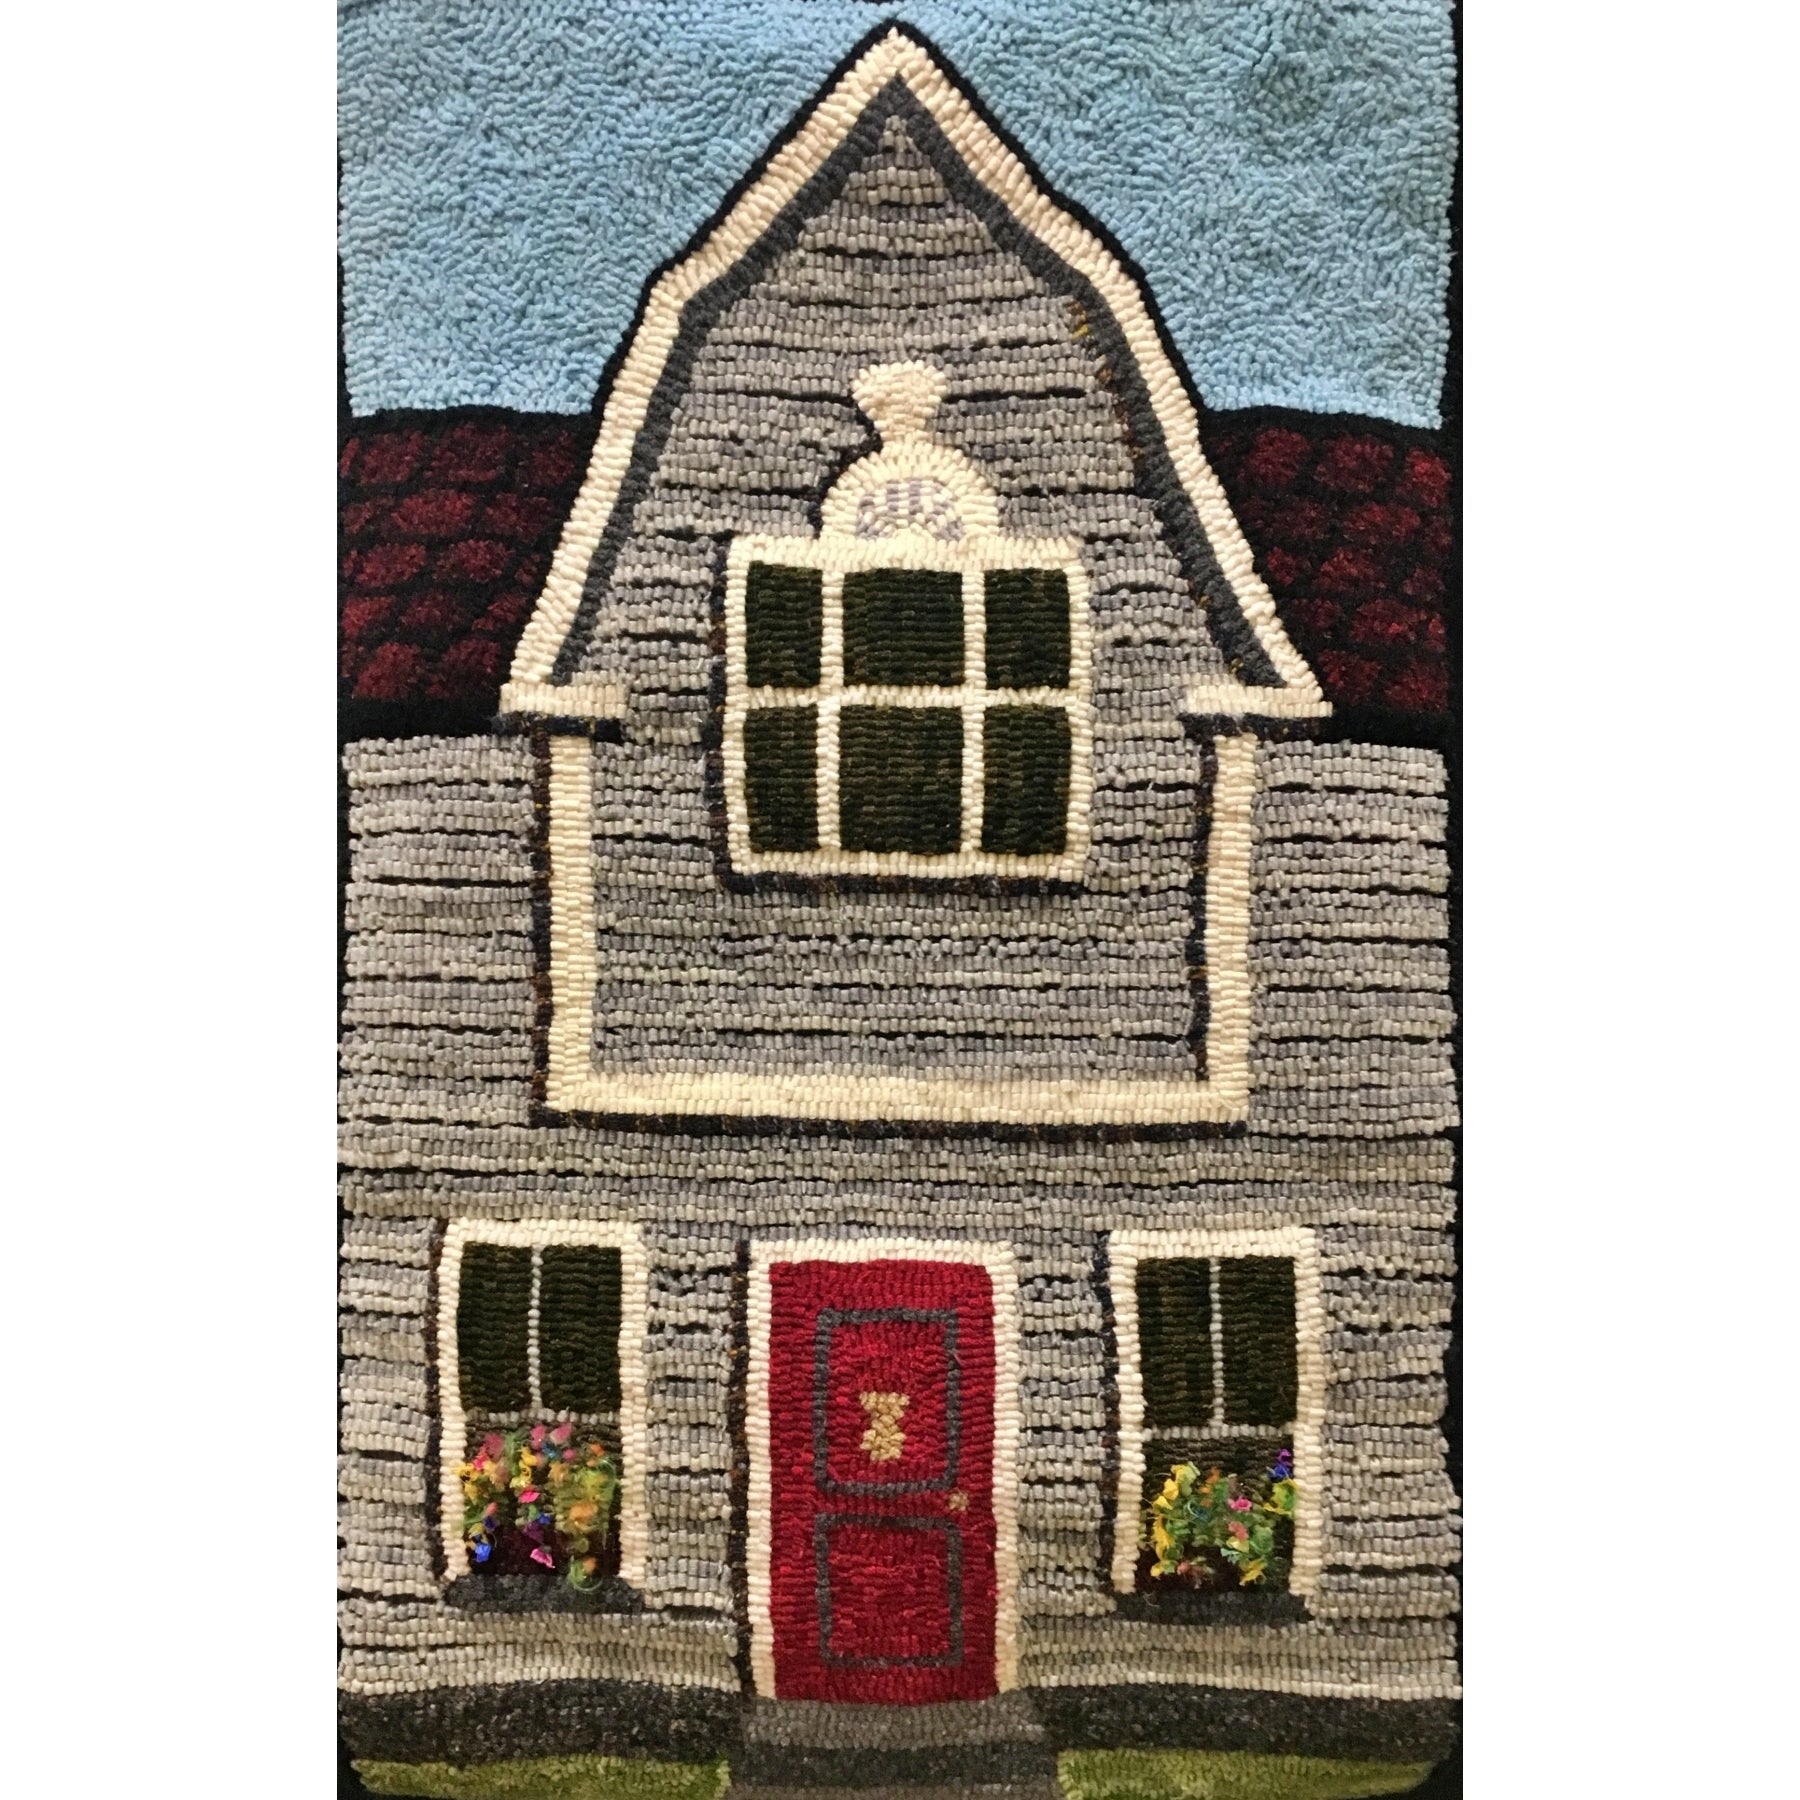 Architectural Details - Pat's Clapboard House, rug hooked by Darleen Pezza